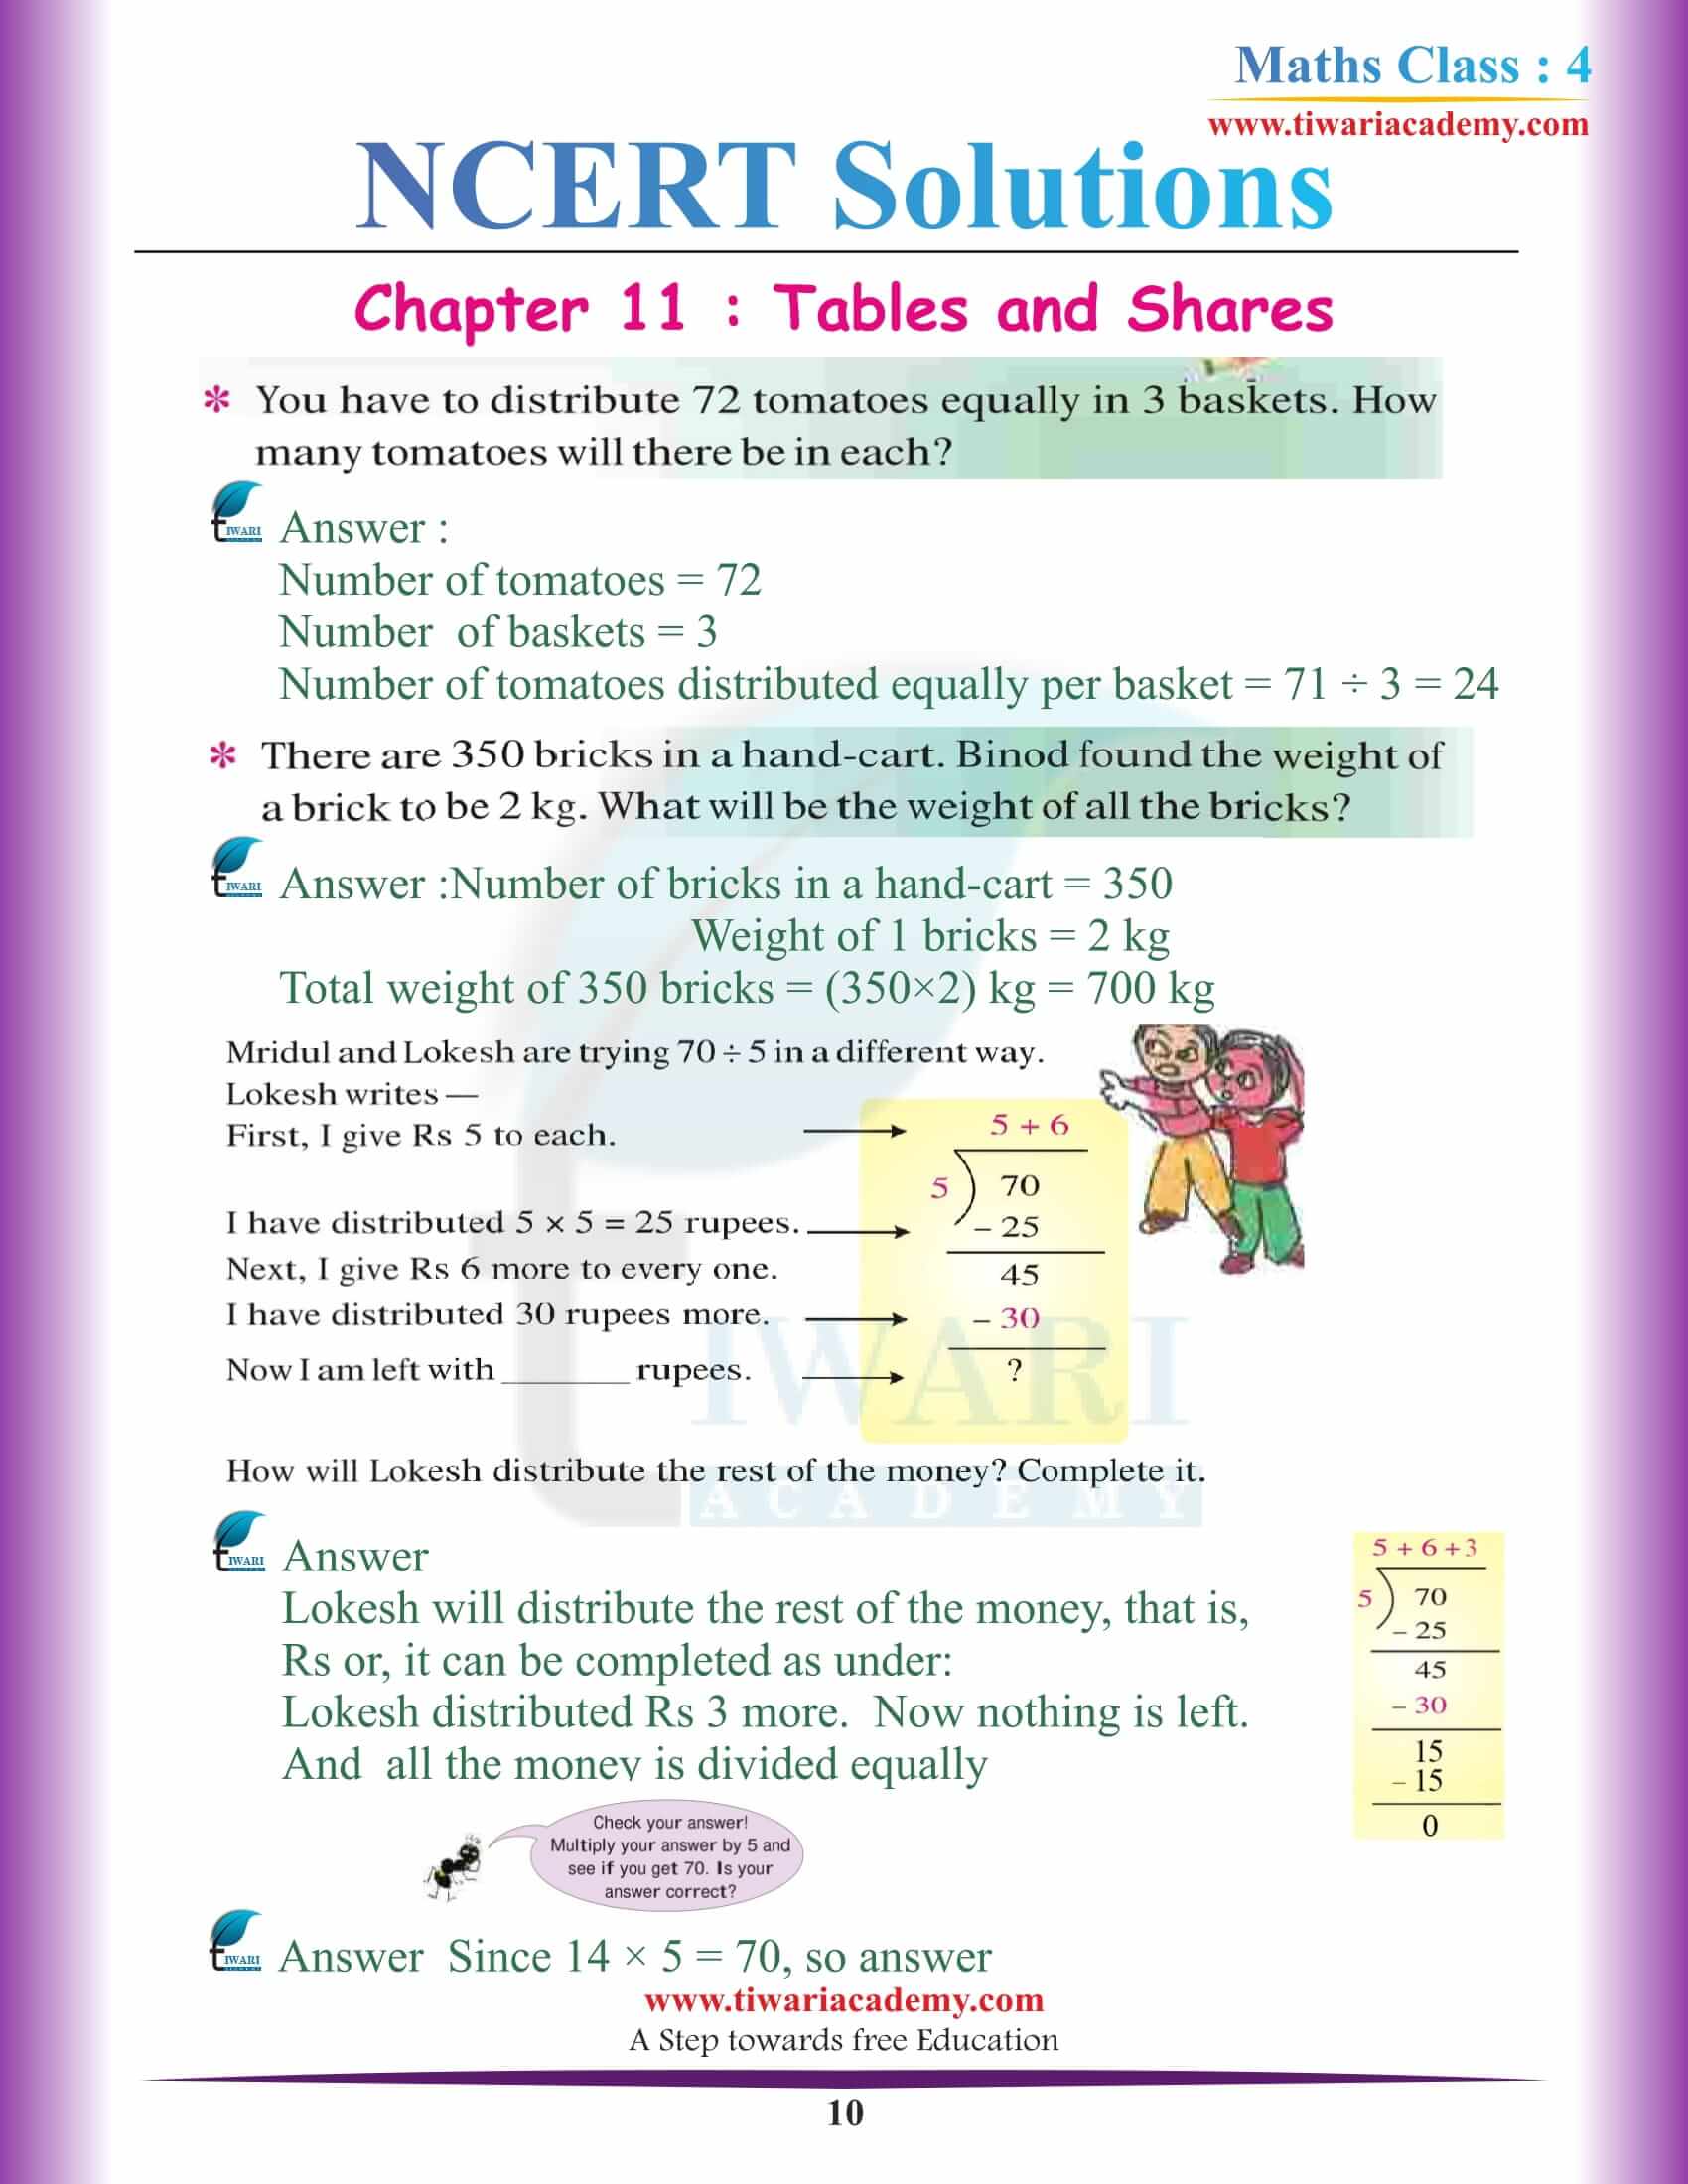 Class 4 Maths NCERT Chapter 11 Solutions in PDF